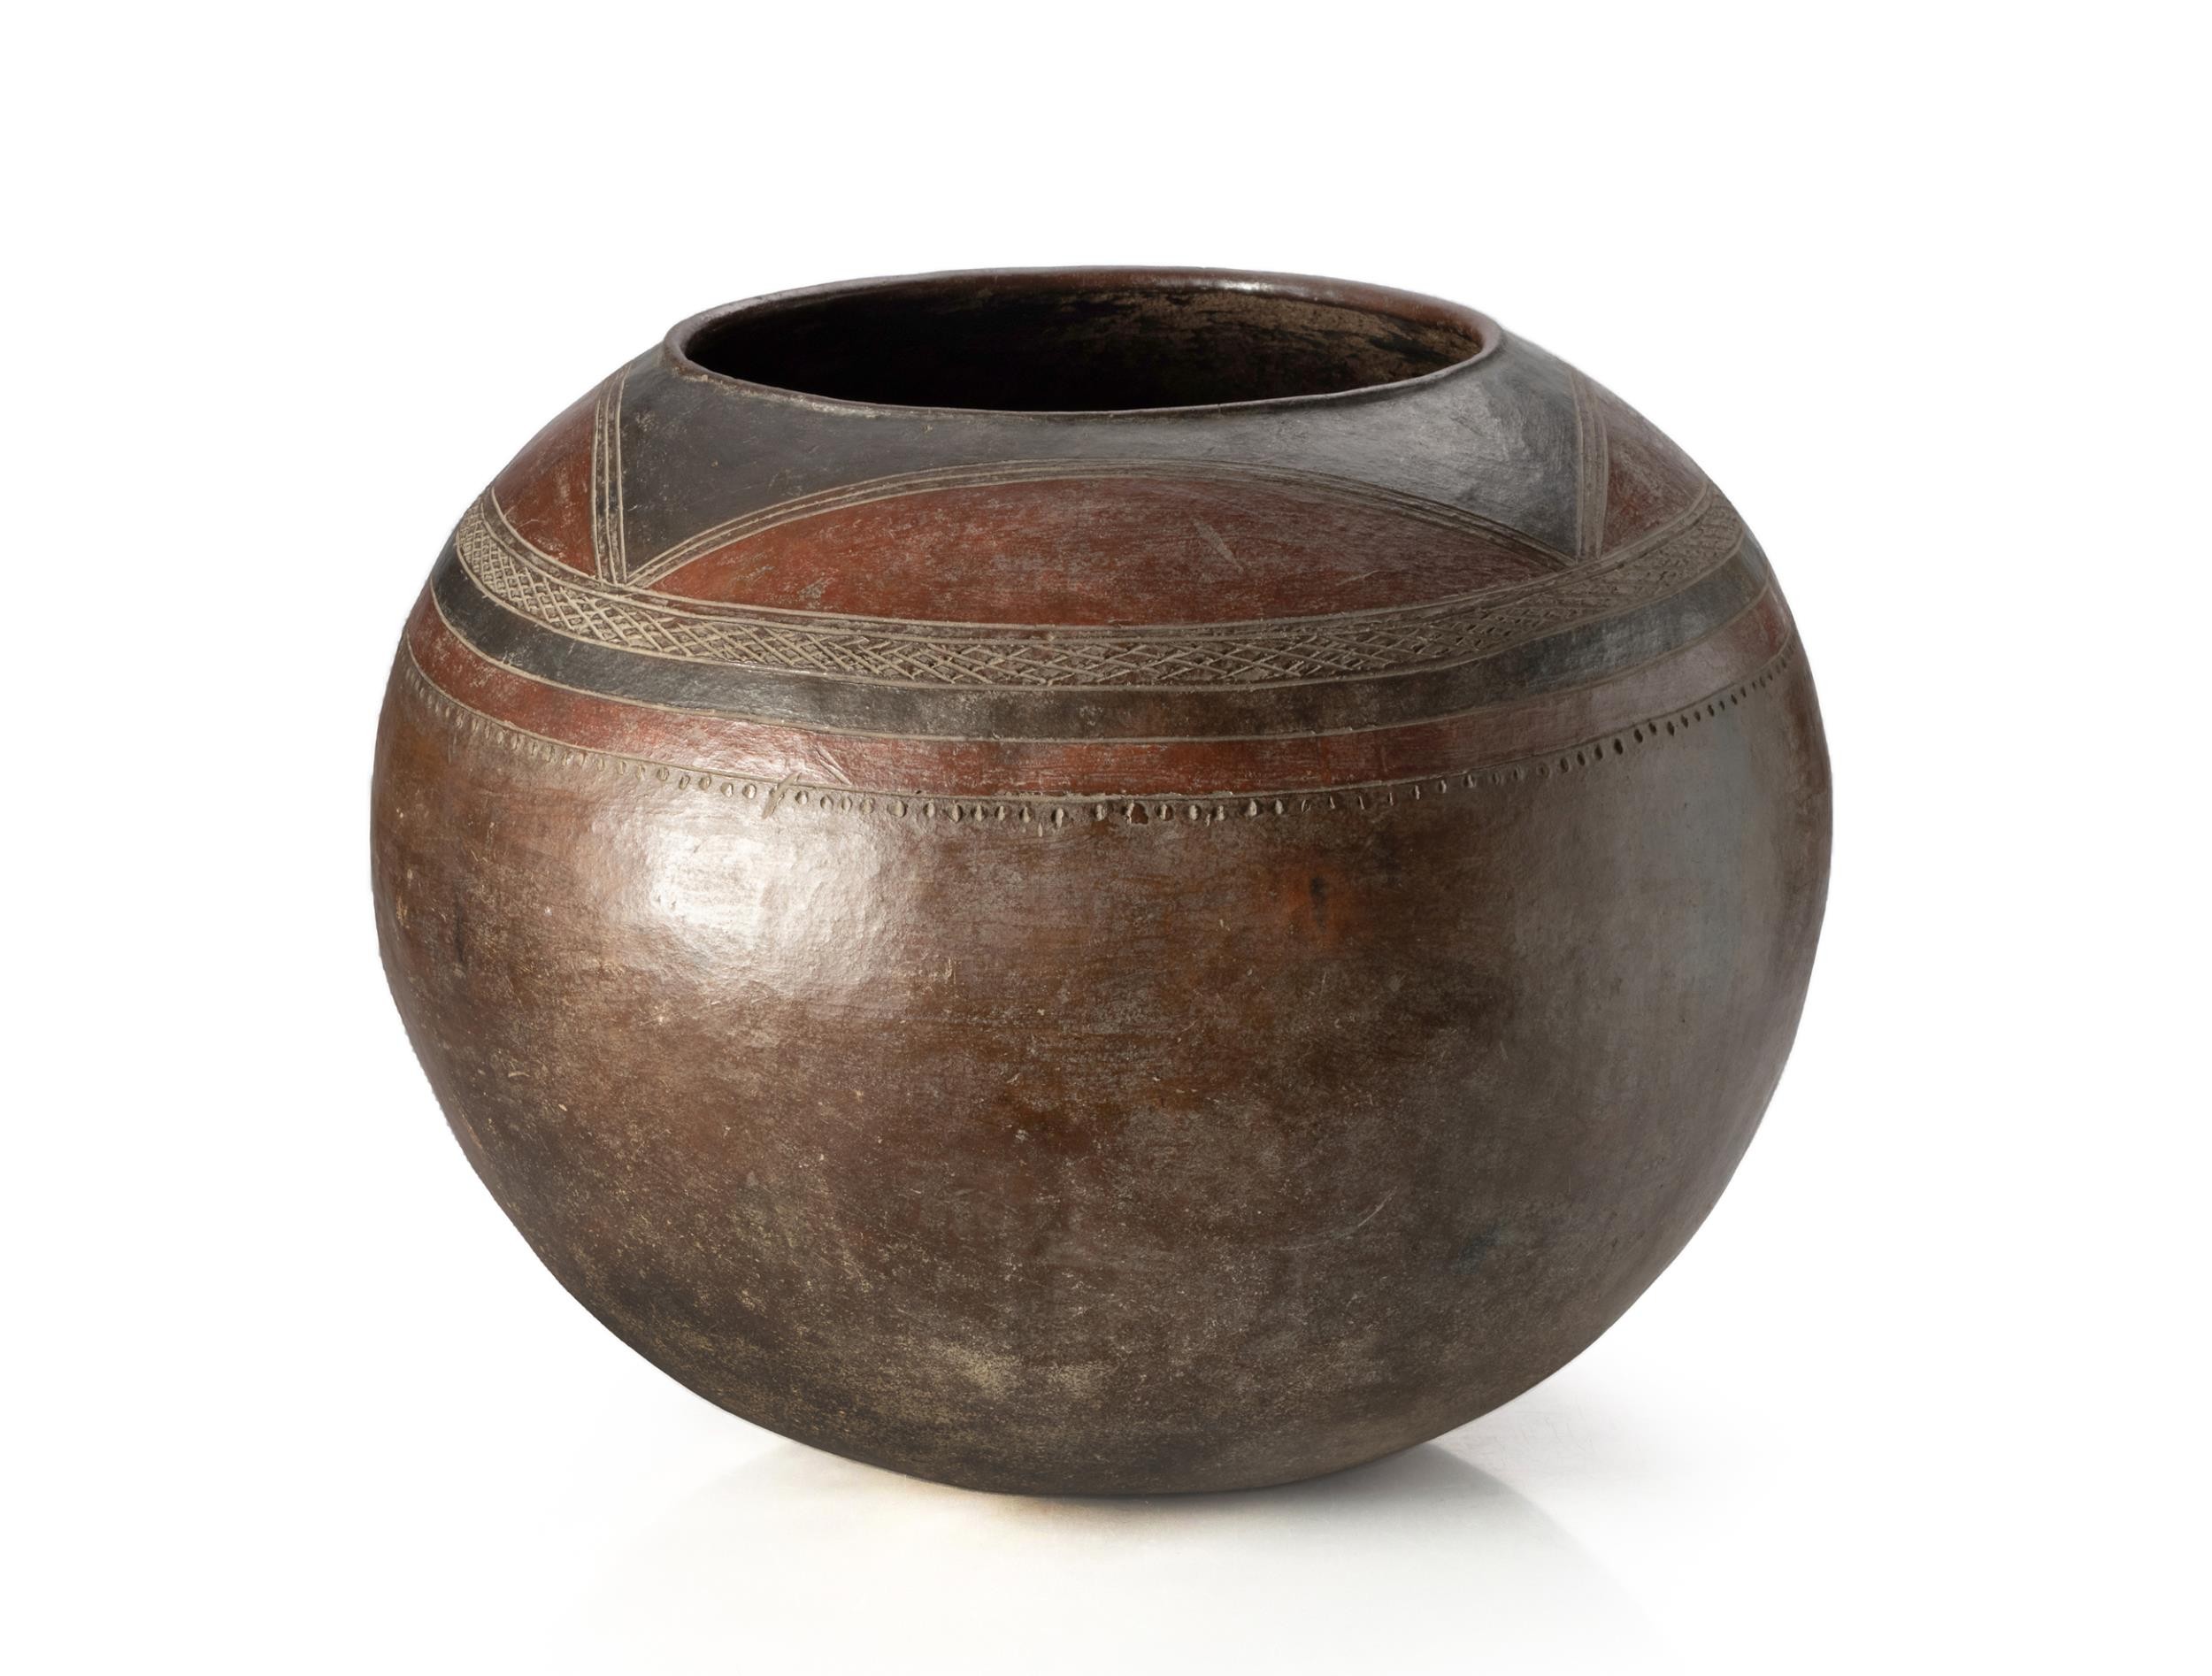 A NTWANE OR NORTH SOTHO BEER POT, EARLY TO MID 20TH CENTURY